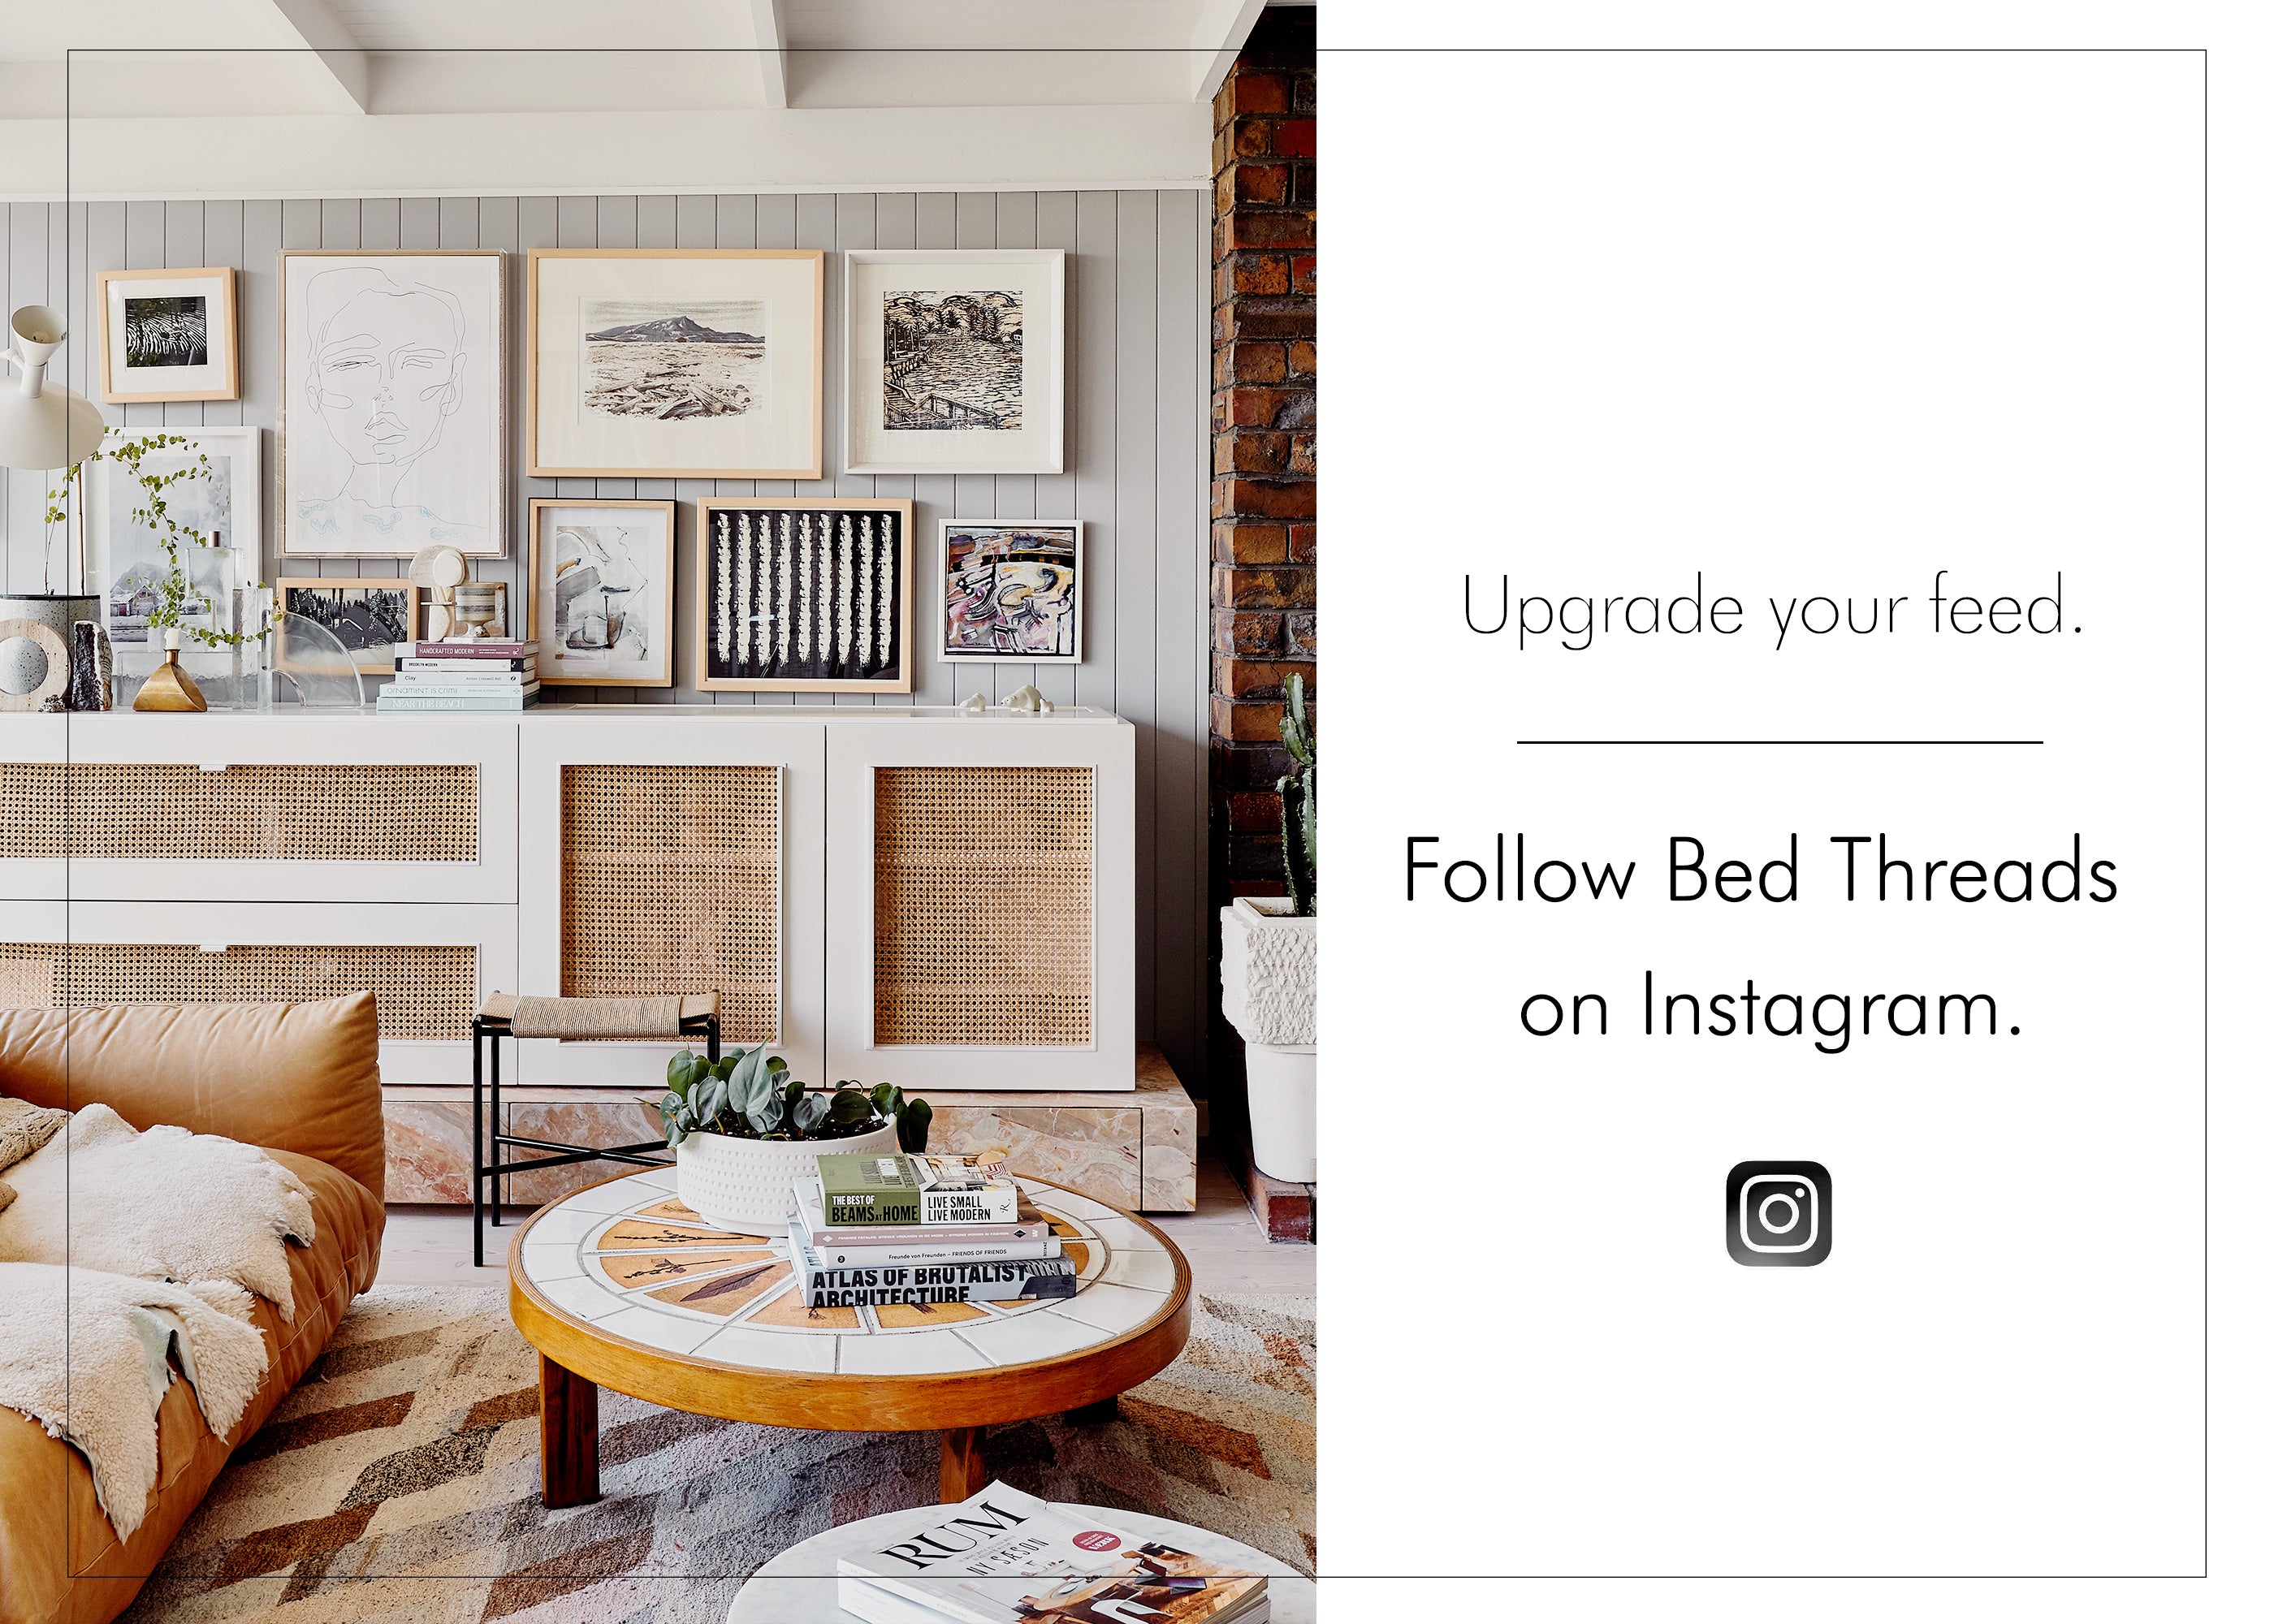 Follow Bed Threads on Instagram